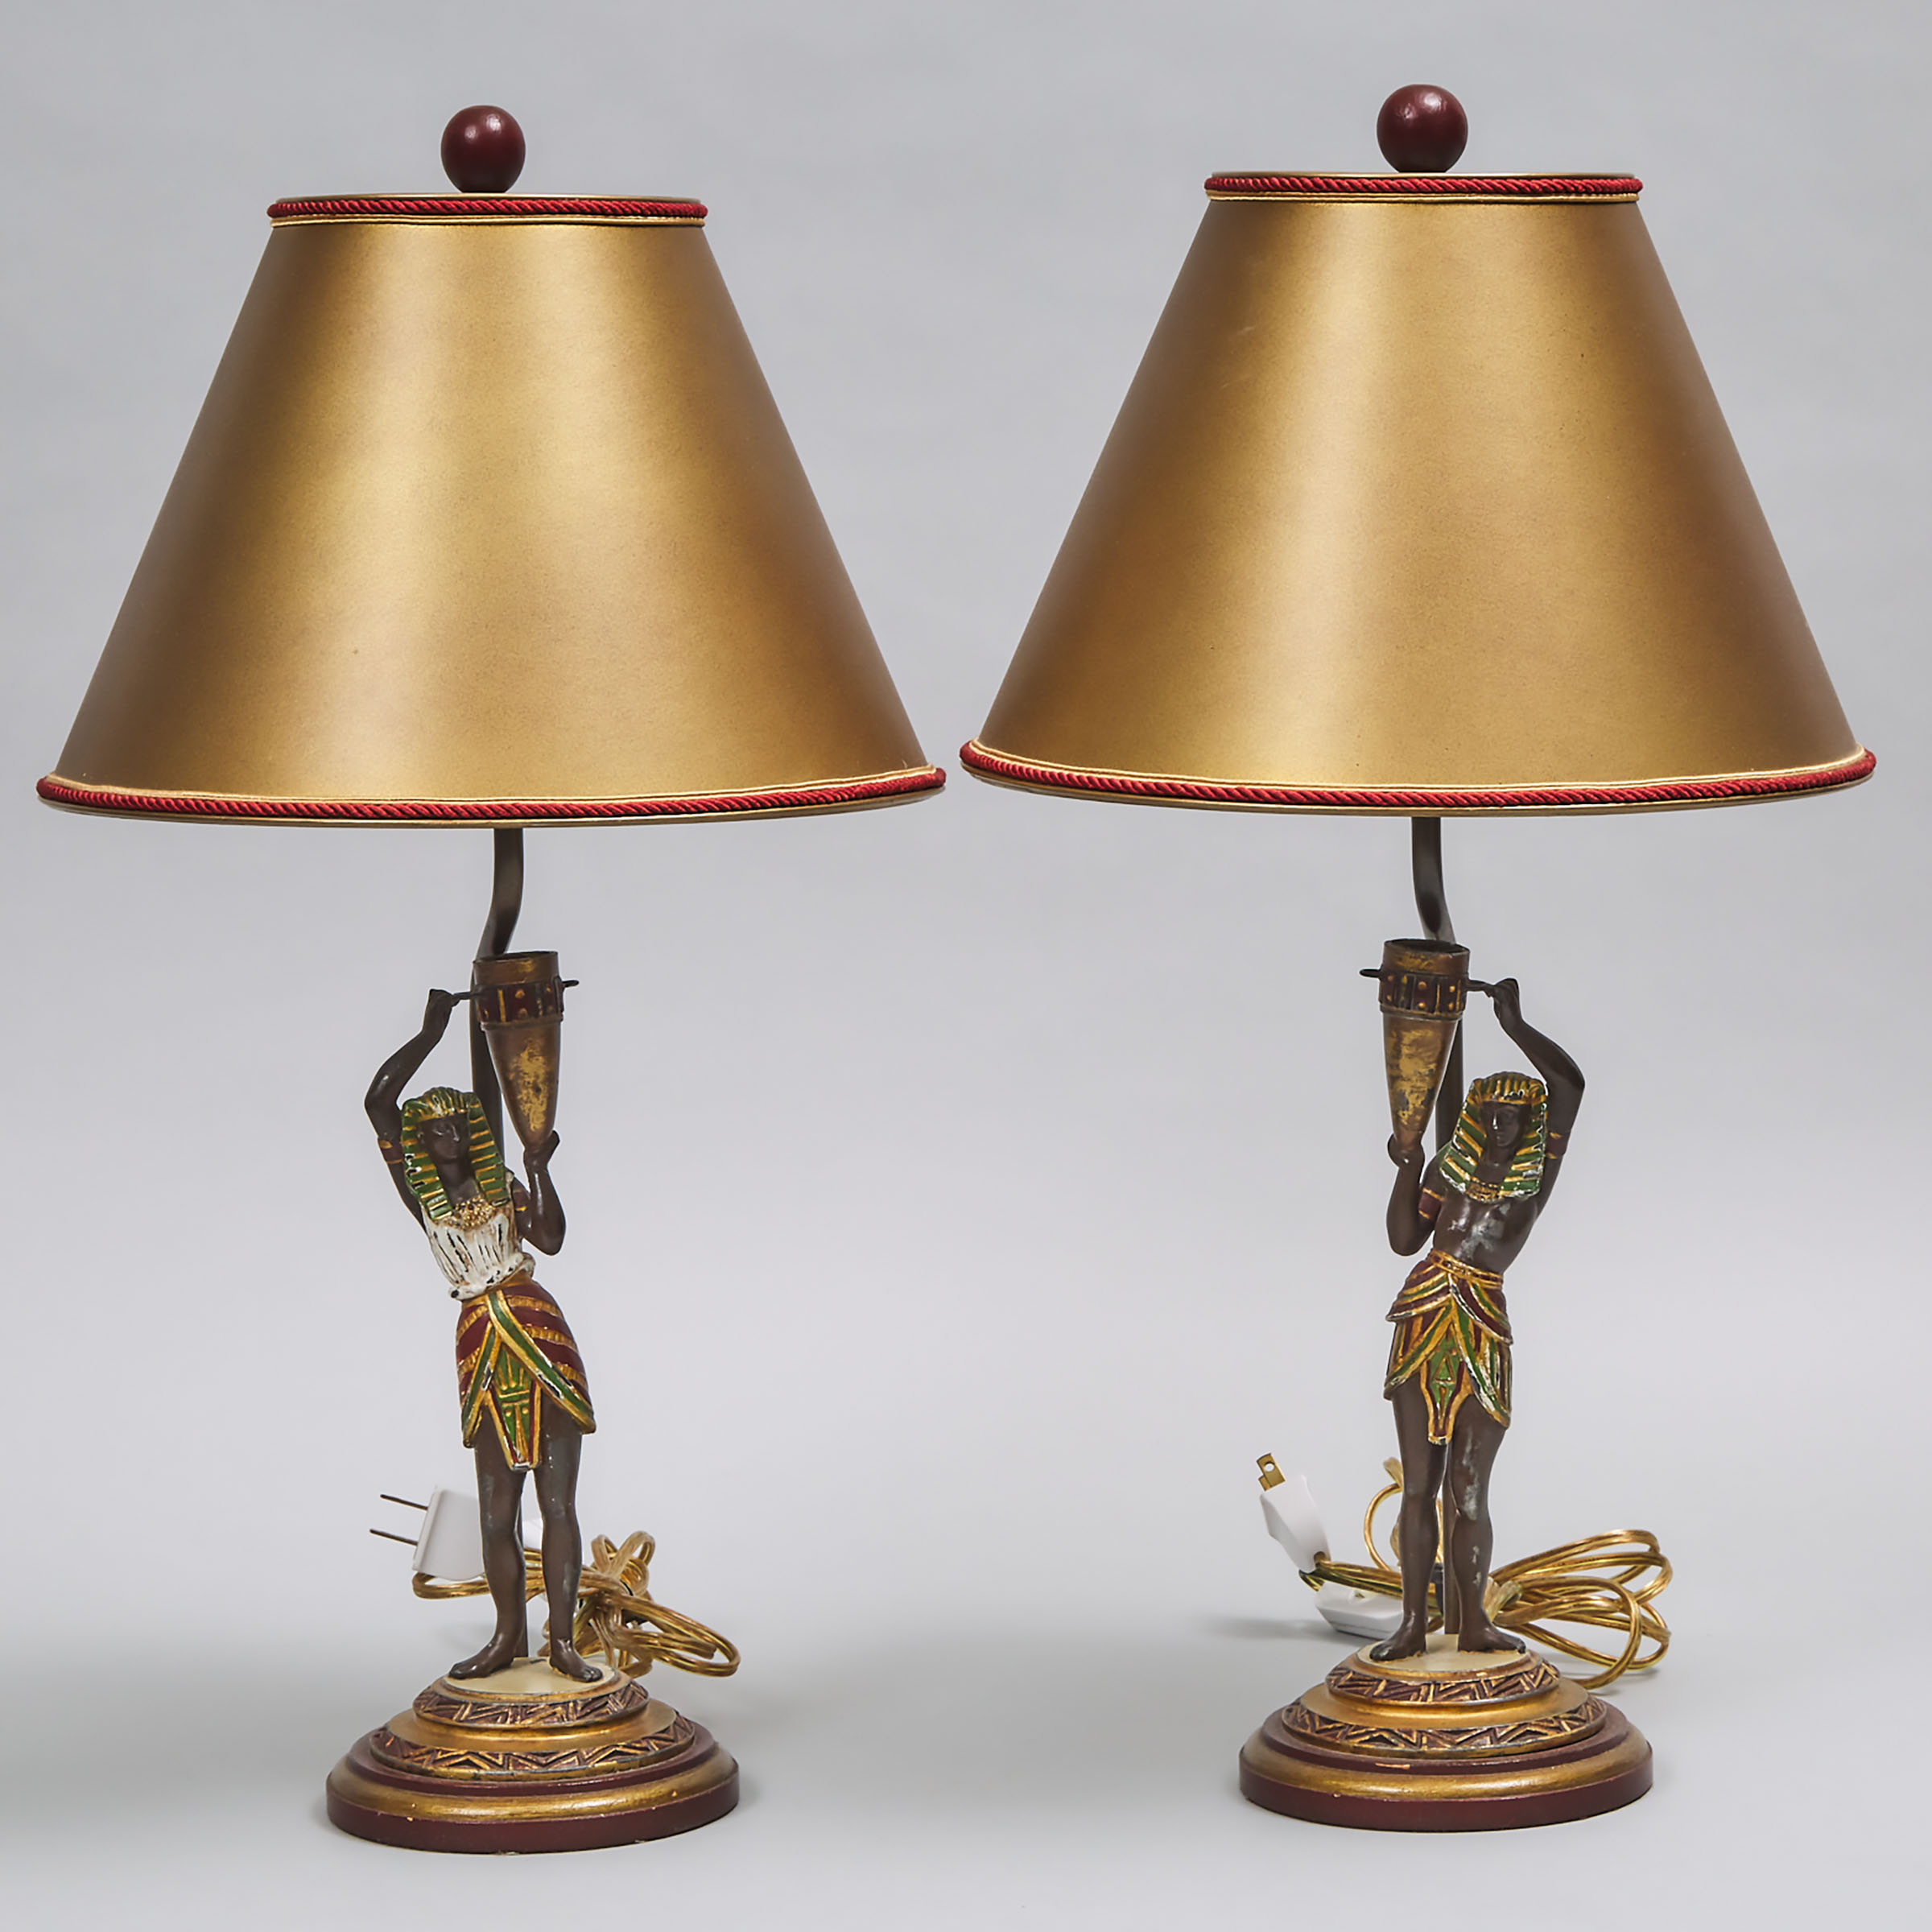 Pair of Cold Painted Metal Egyptian Revival Figural Candlestick Lamps, early 20th century